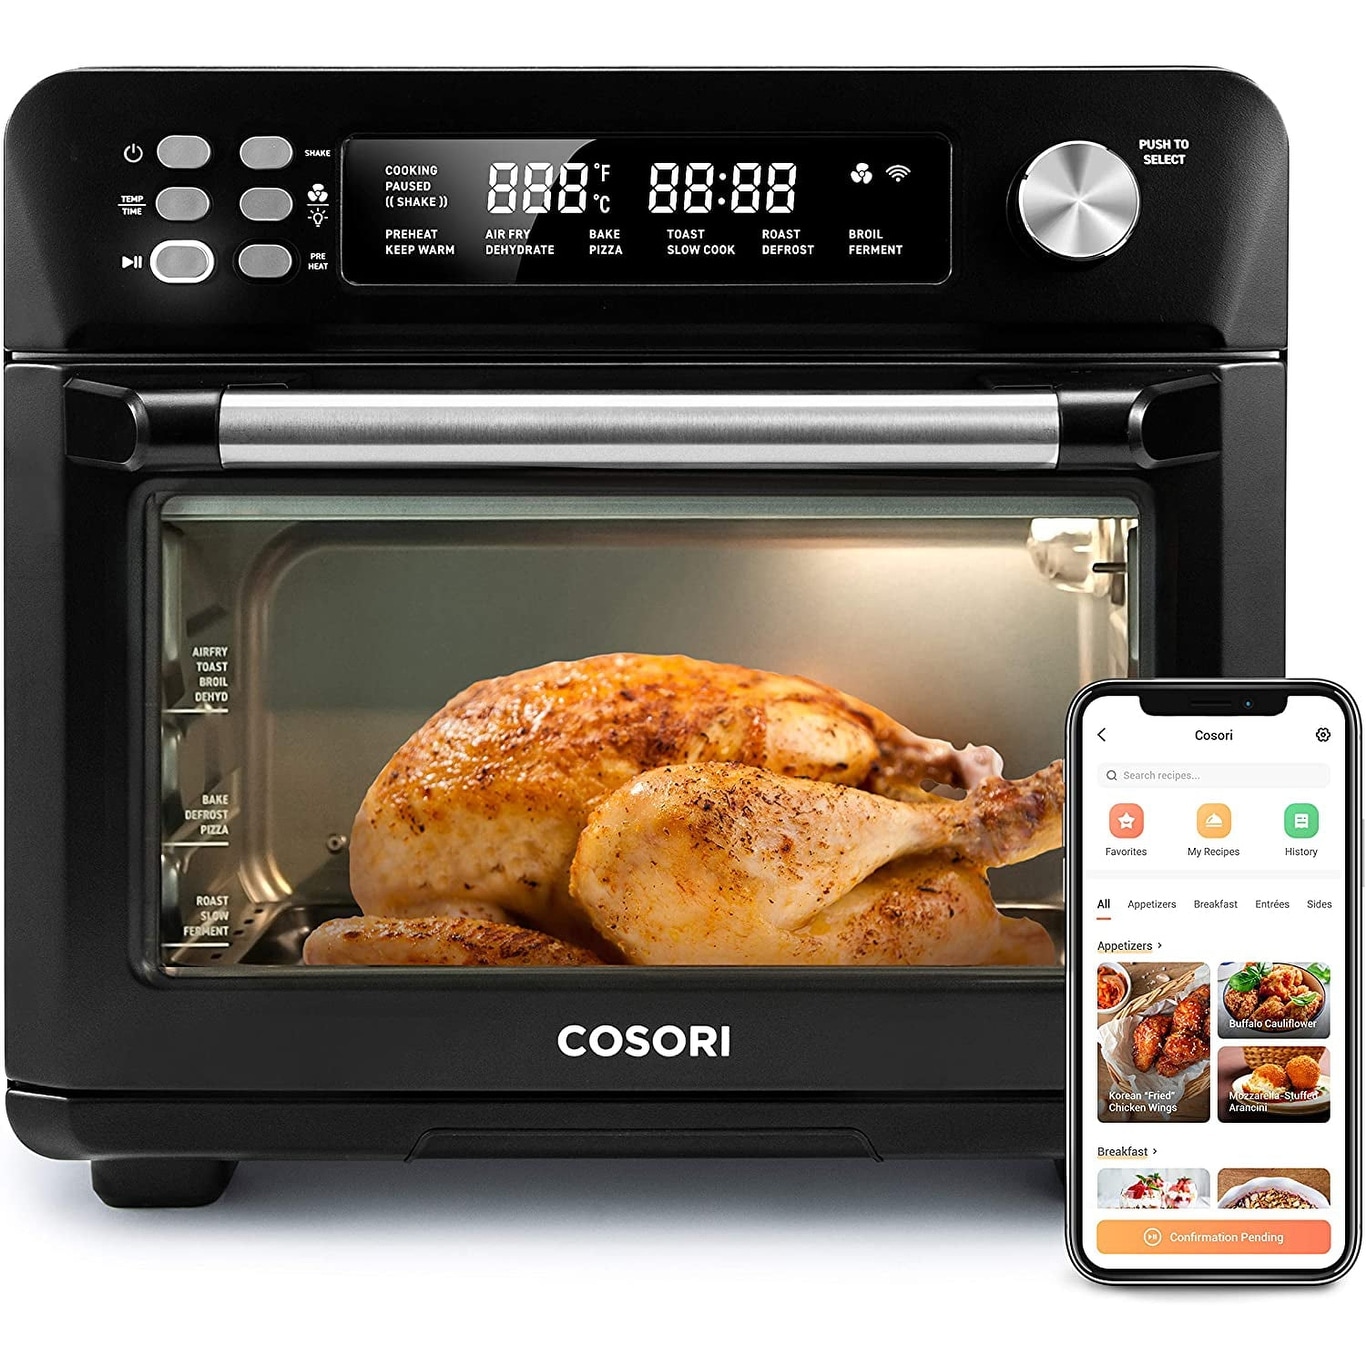 https://ak1.ostkcdn.com/images/products/is/images/direct/5320d13e4a8ce4f3cc4bfc9eb91c188870e8831b/Toaster-Oven-Air-Fryer-CS100-AO-RXB%2C-Smart-32QT-Large-Stainless-Steel-Convection-Oven-for-Pizza%2C-Rotisserie%2C-Black.jpg